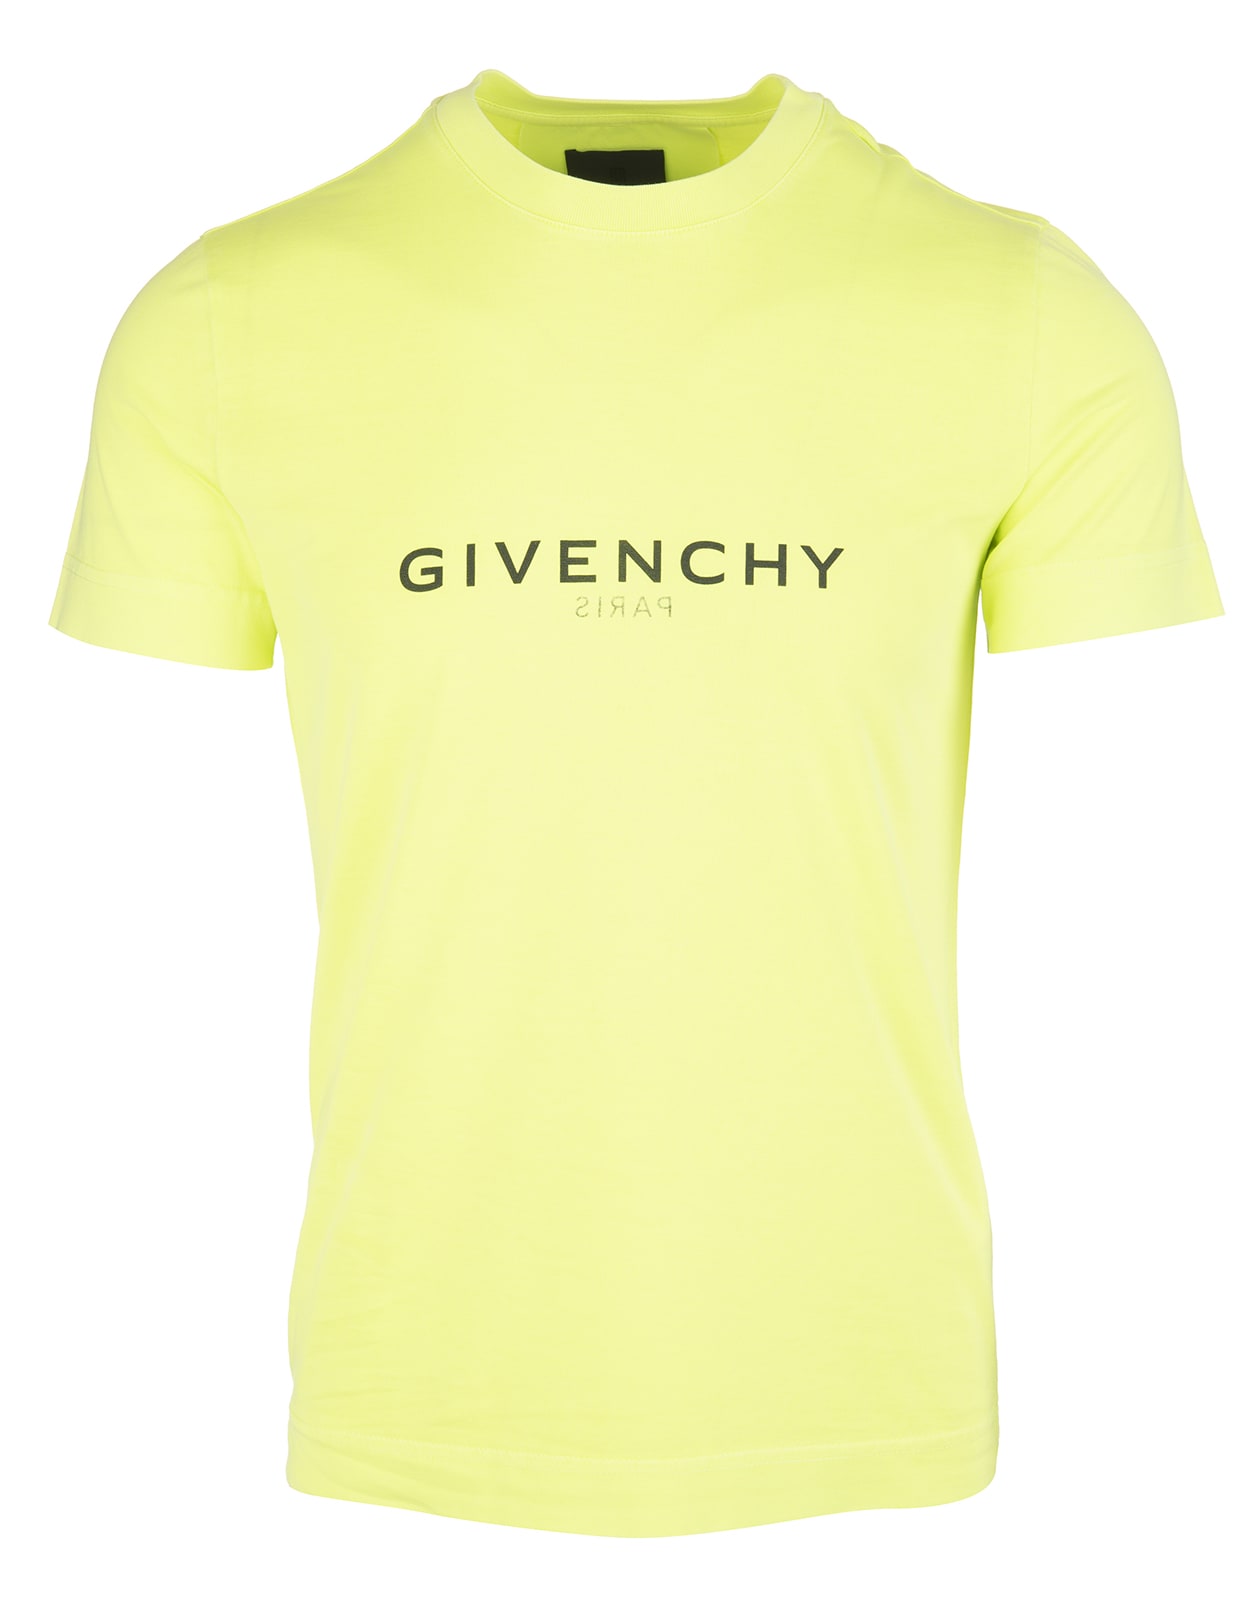 Man Fluo Yellow Slim Fit Givenchy Reverse T-shirt